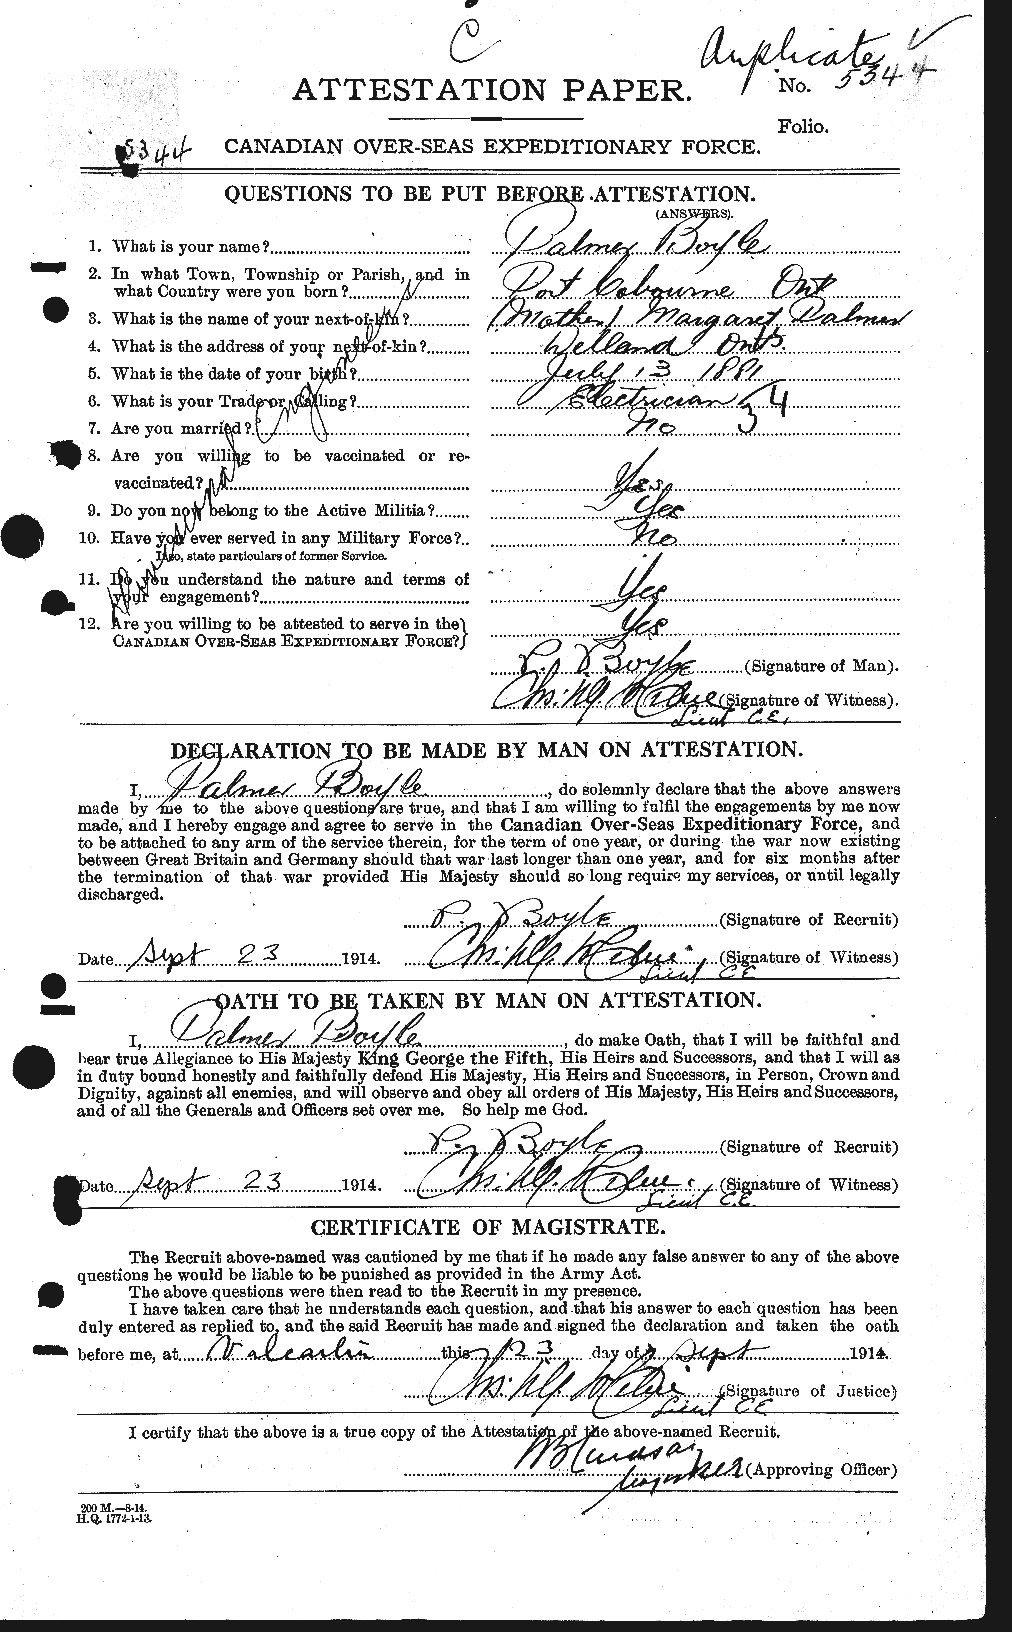 Personnel Records of the First World War - CEF 255943a